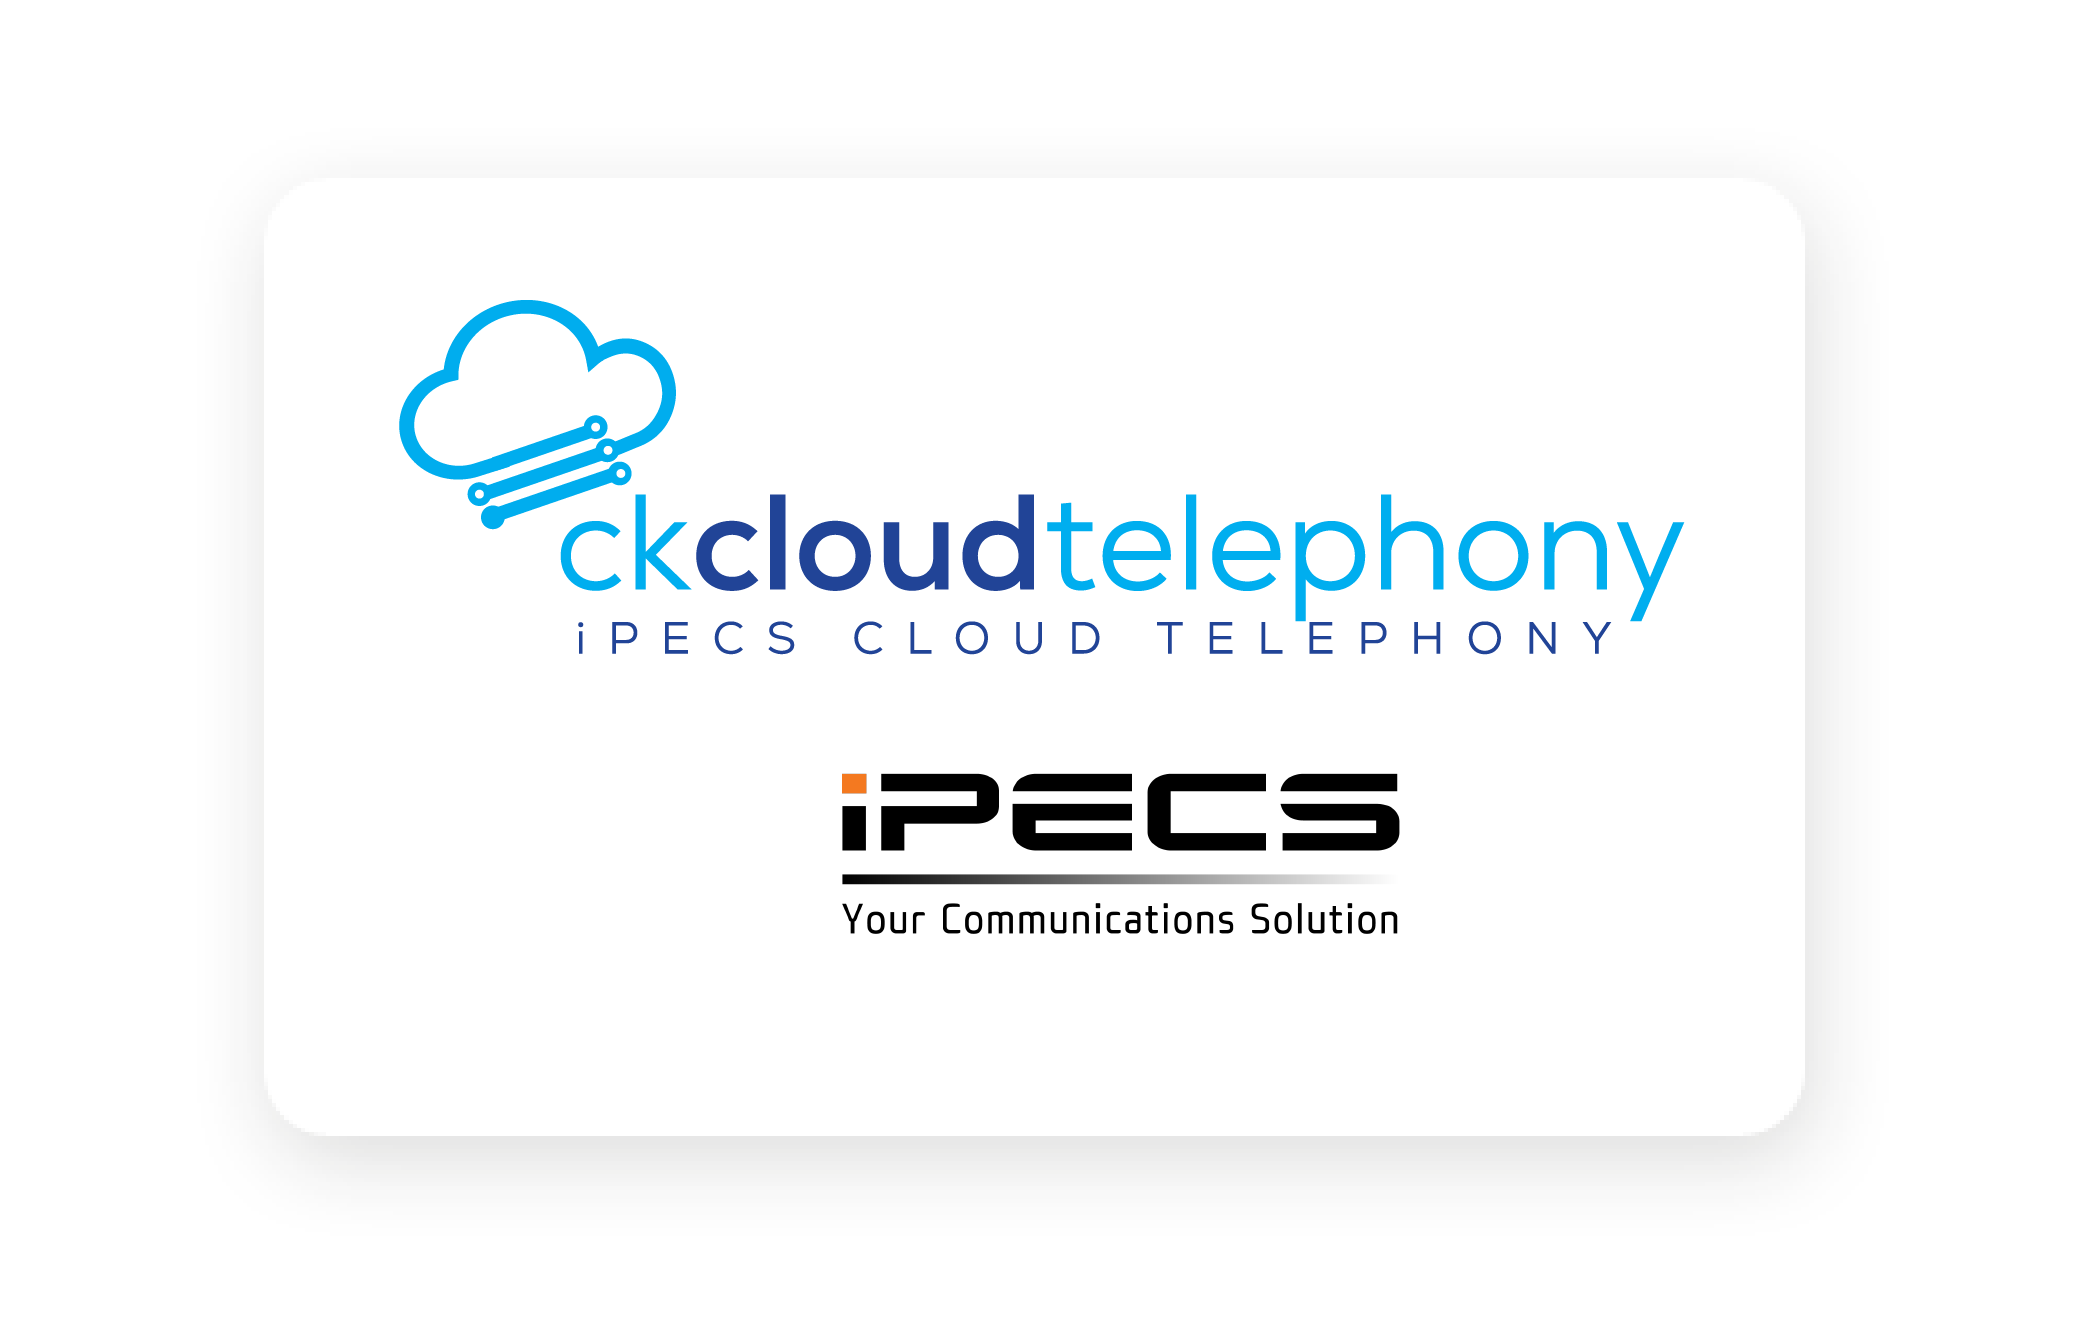 CK Cloud Telephony with iPECS from Cloud Kitchen